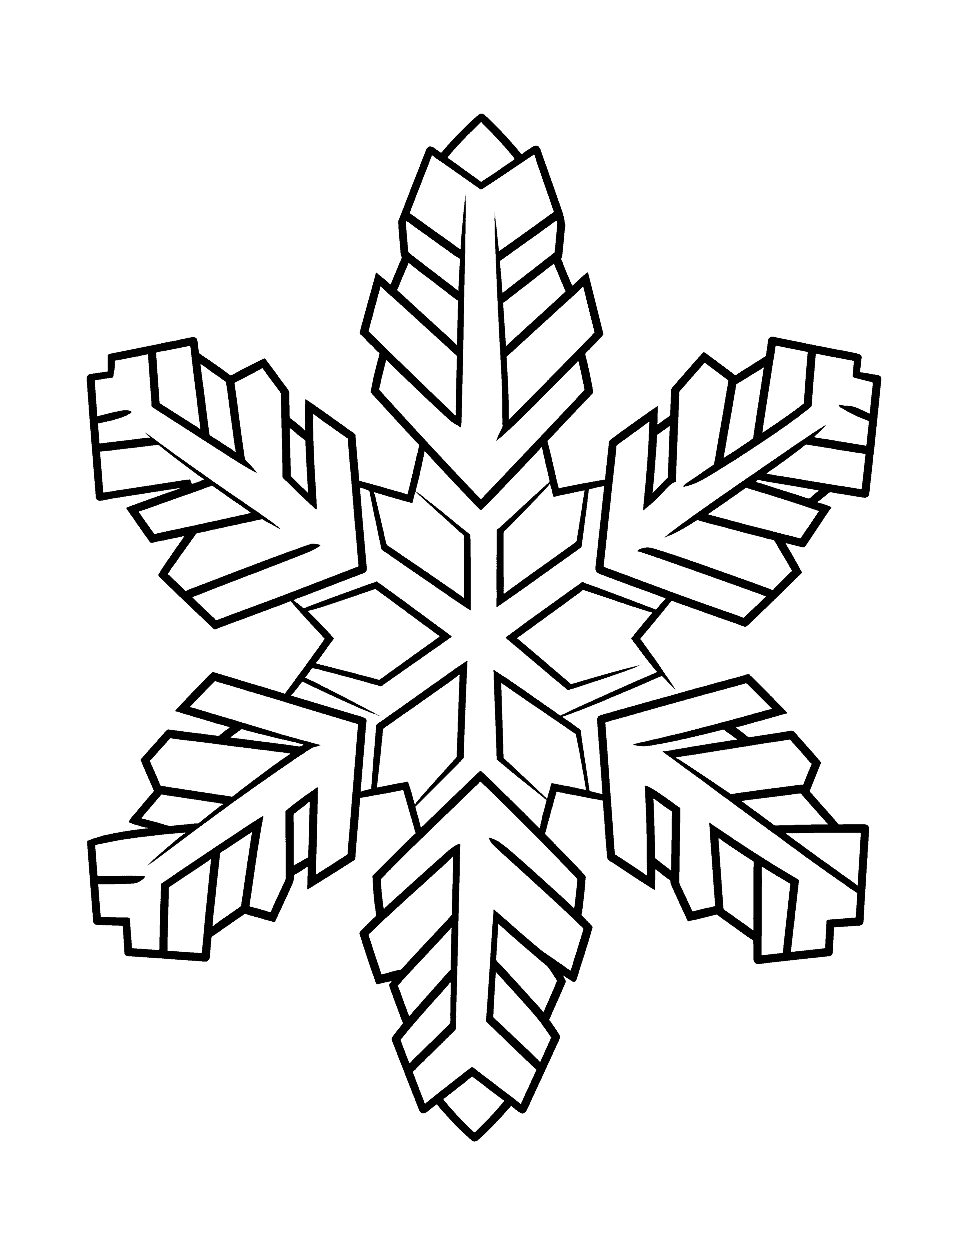 Snowflake Designer Christmas Coloring Page - A detailed design of a beautiful, unique snowflake with a Mandala-like design.